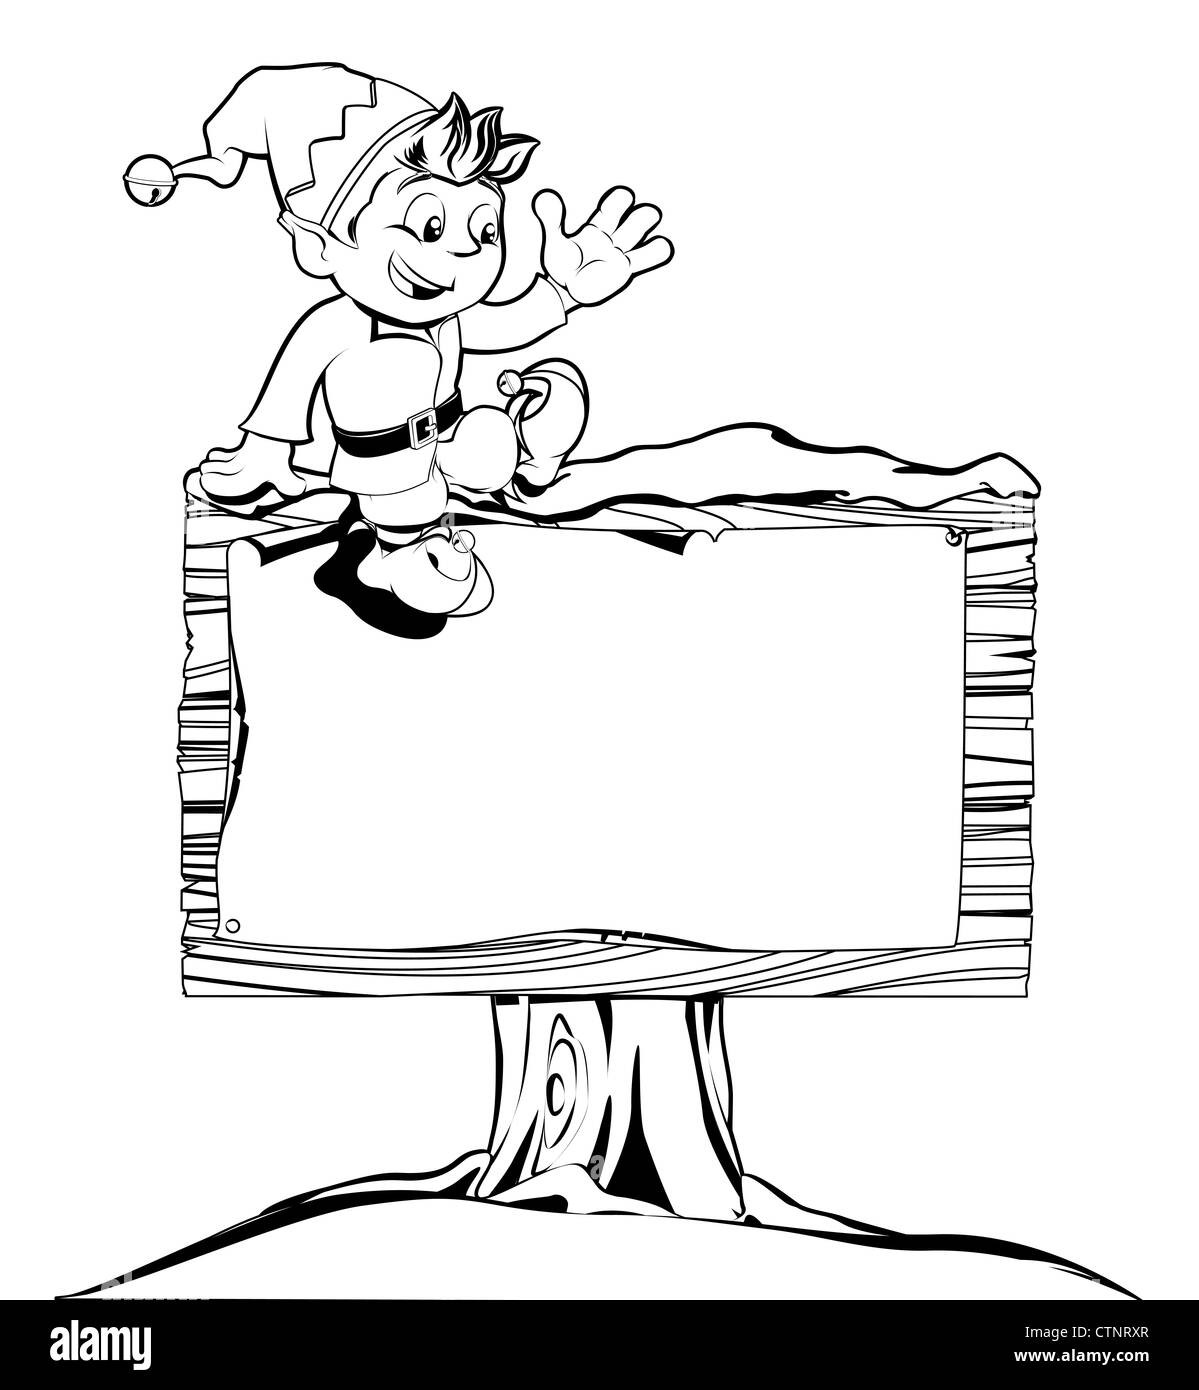 Drawing of a happy Christmas elf sitting on a sign Stock Photo